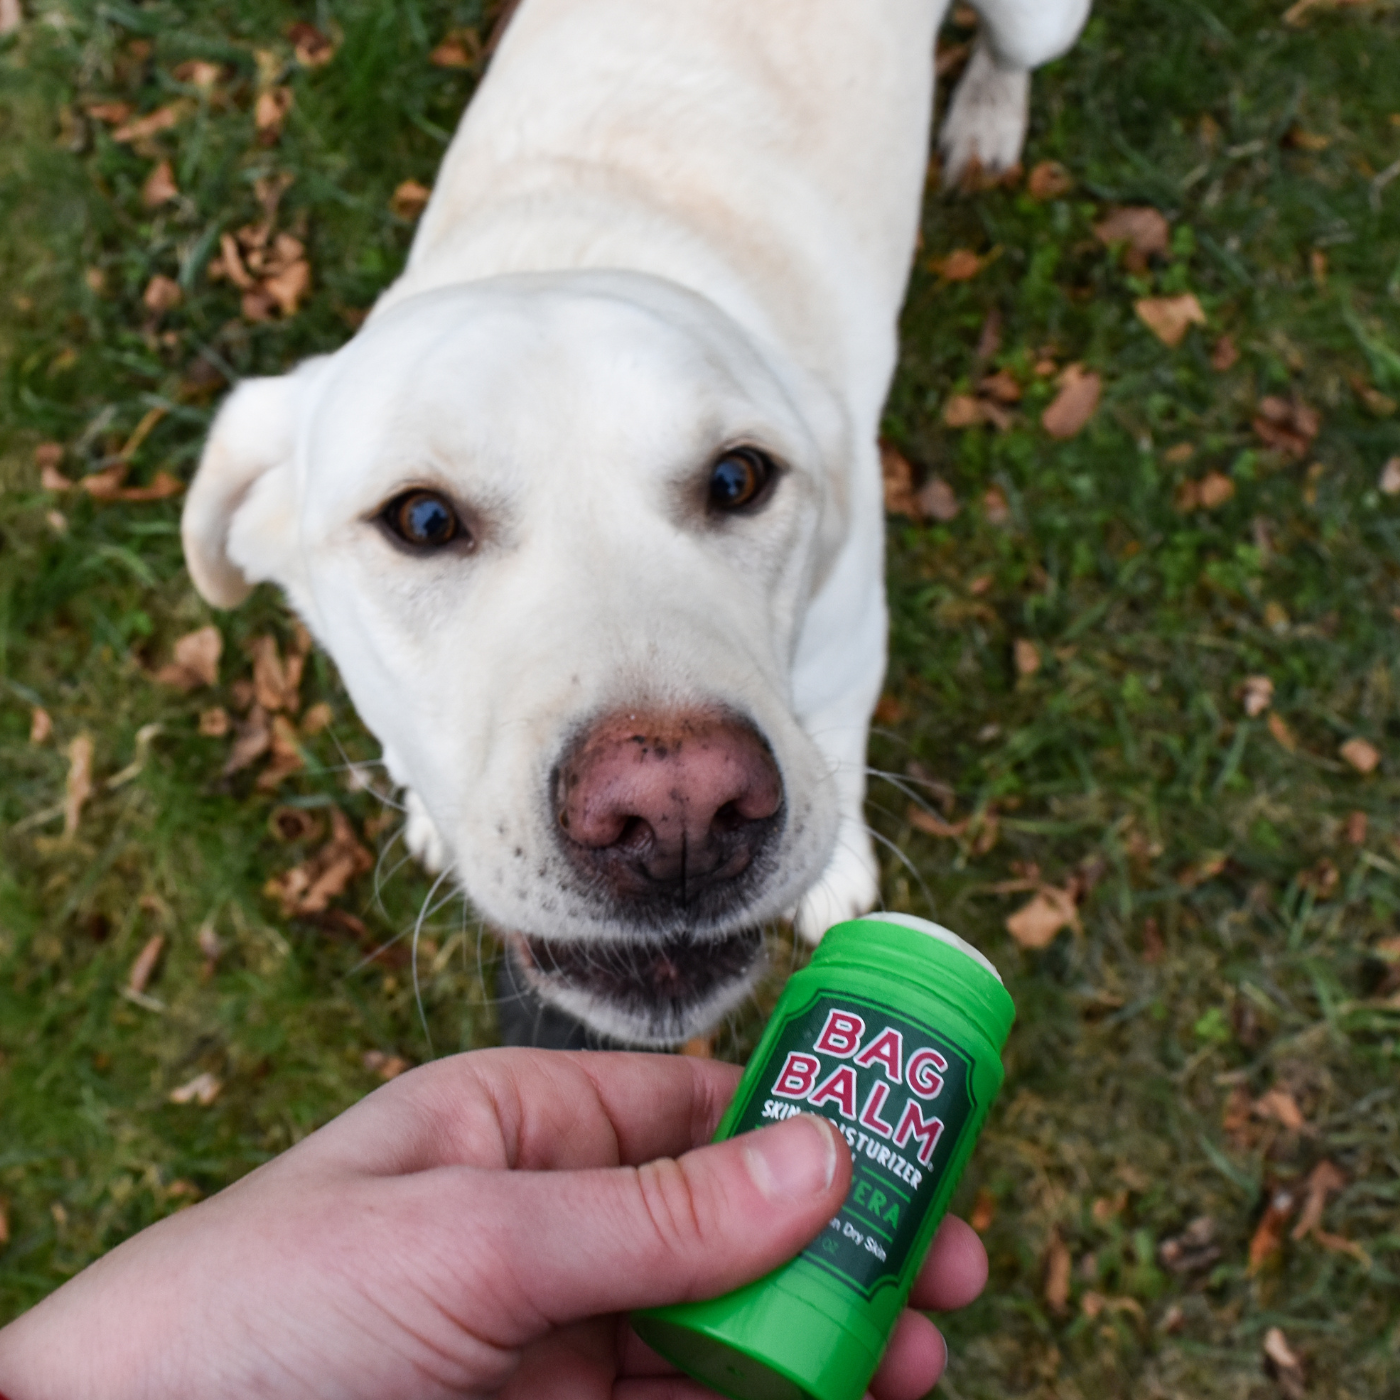 A dog sniffing a stick of Bag Balm